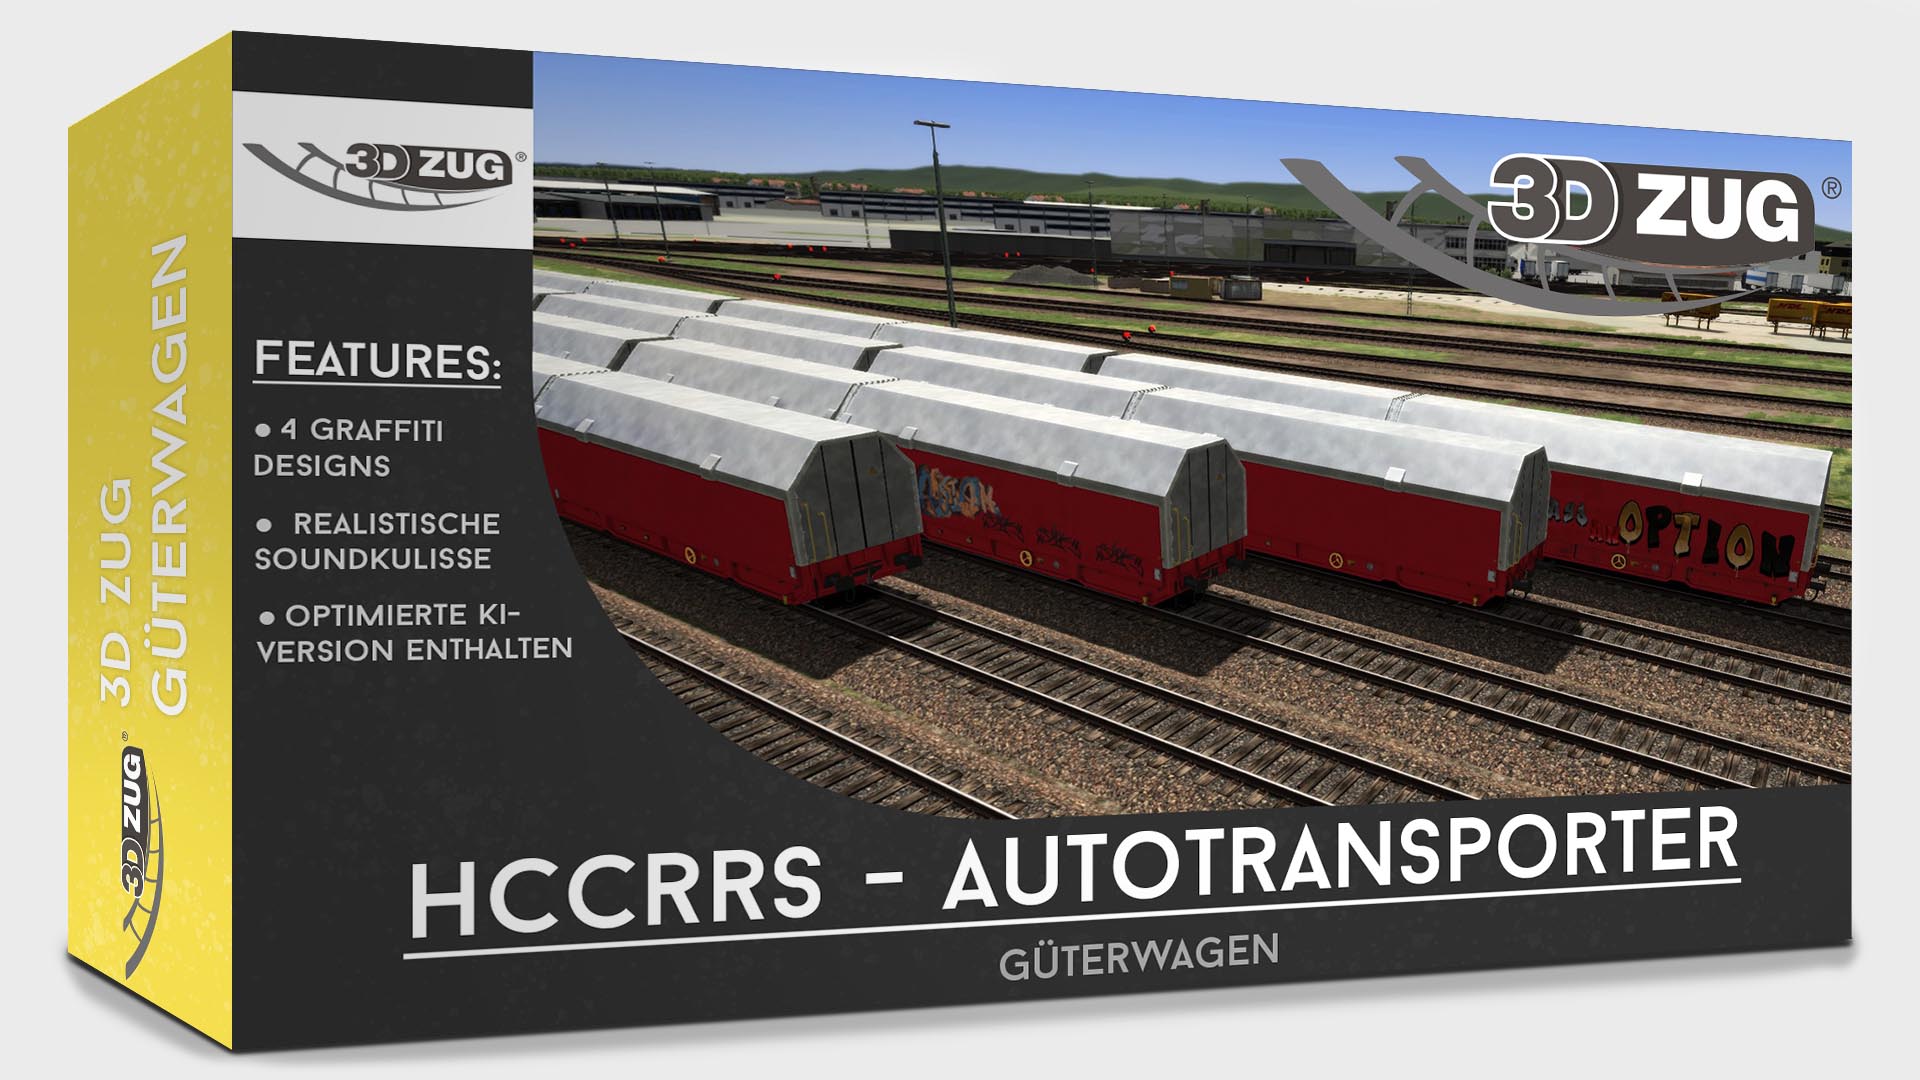 Hccrrs-Car carrier